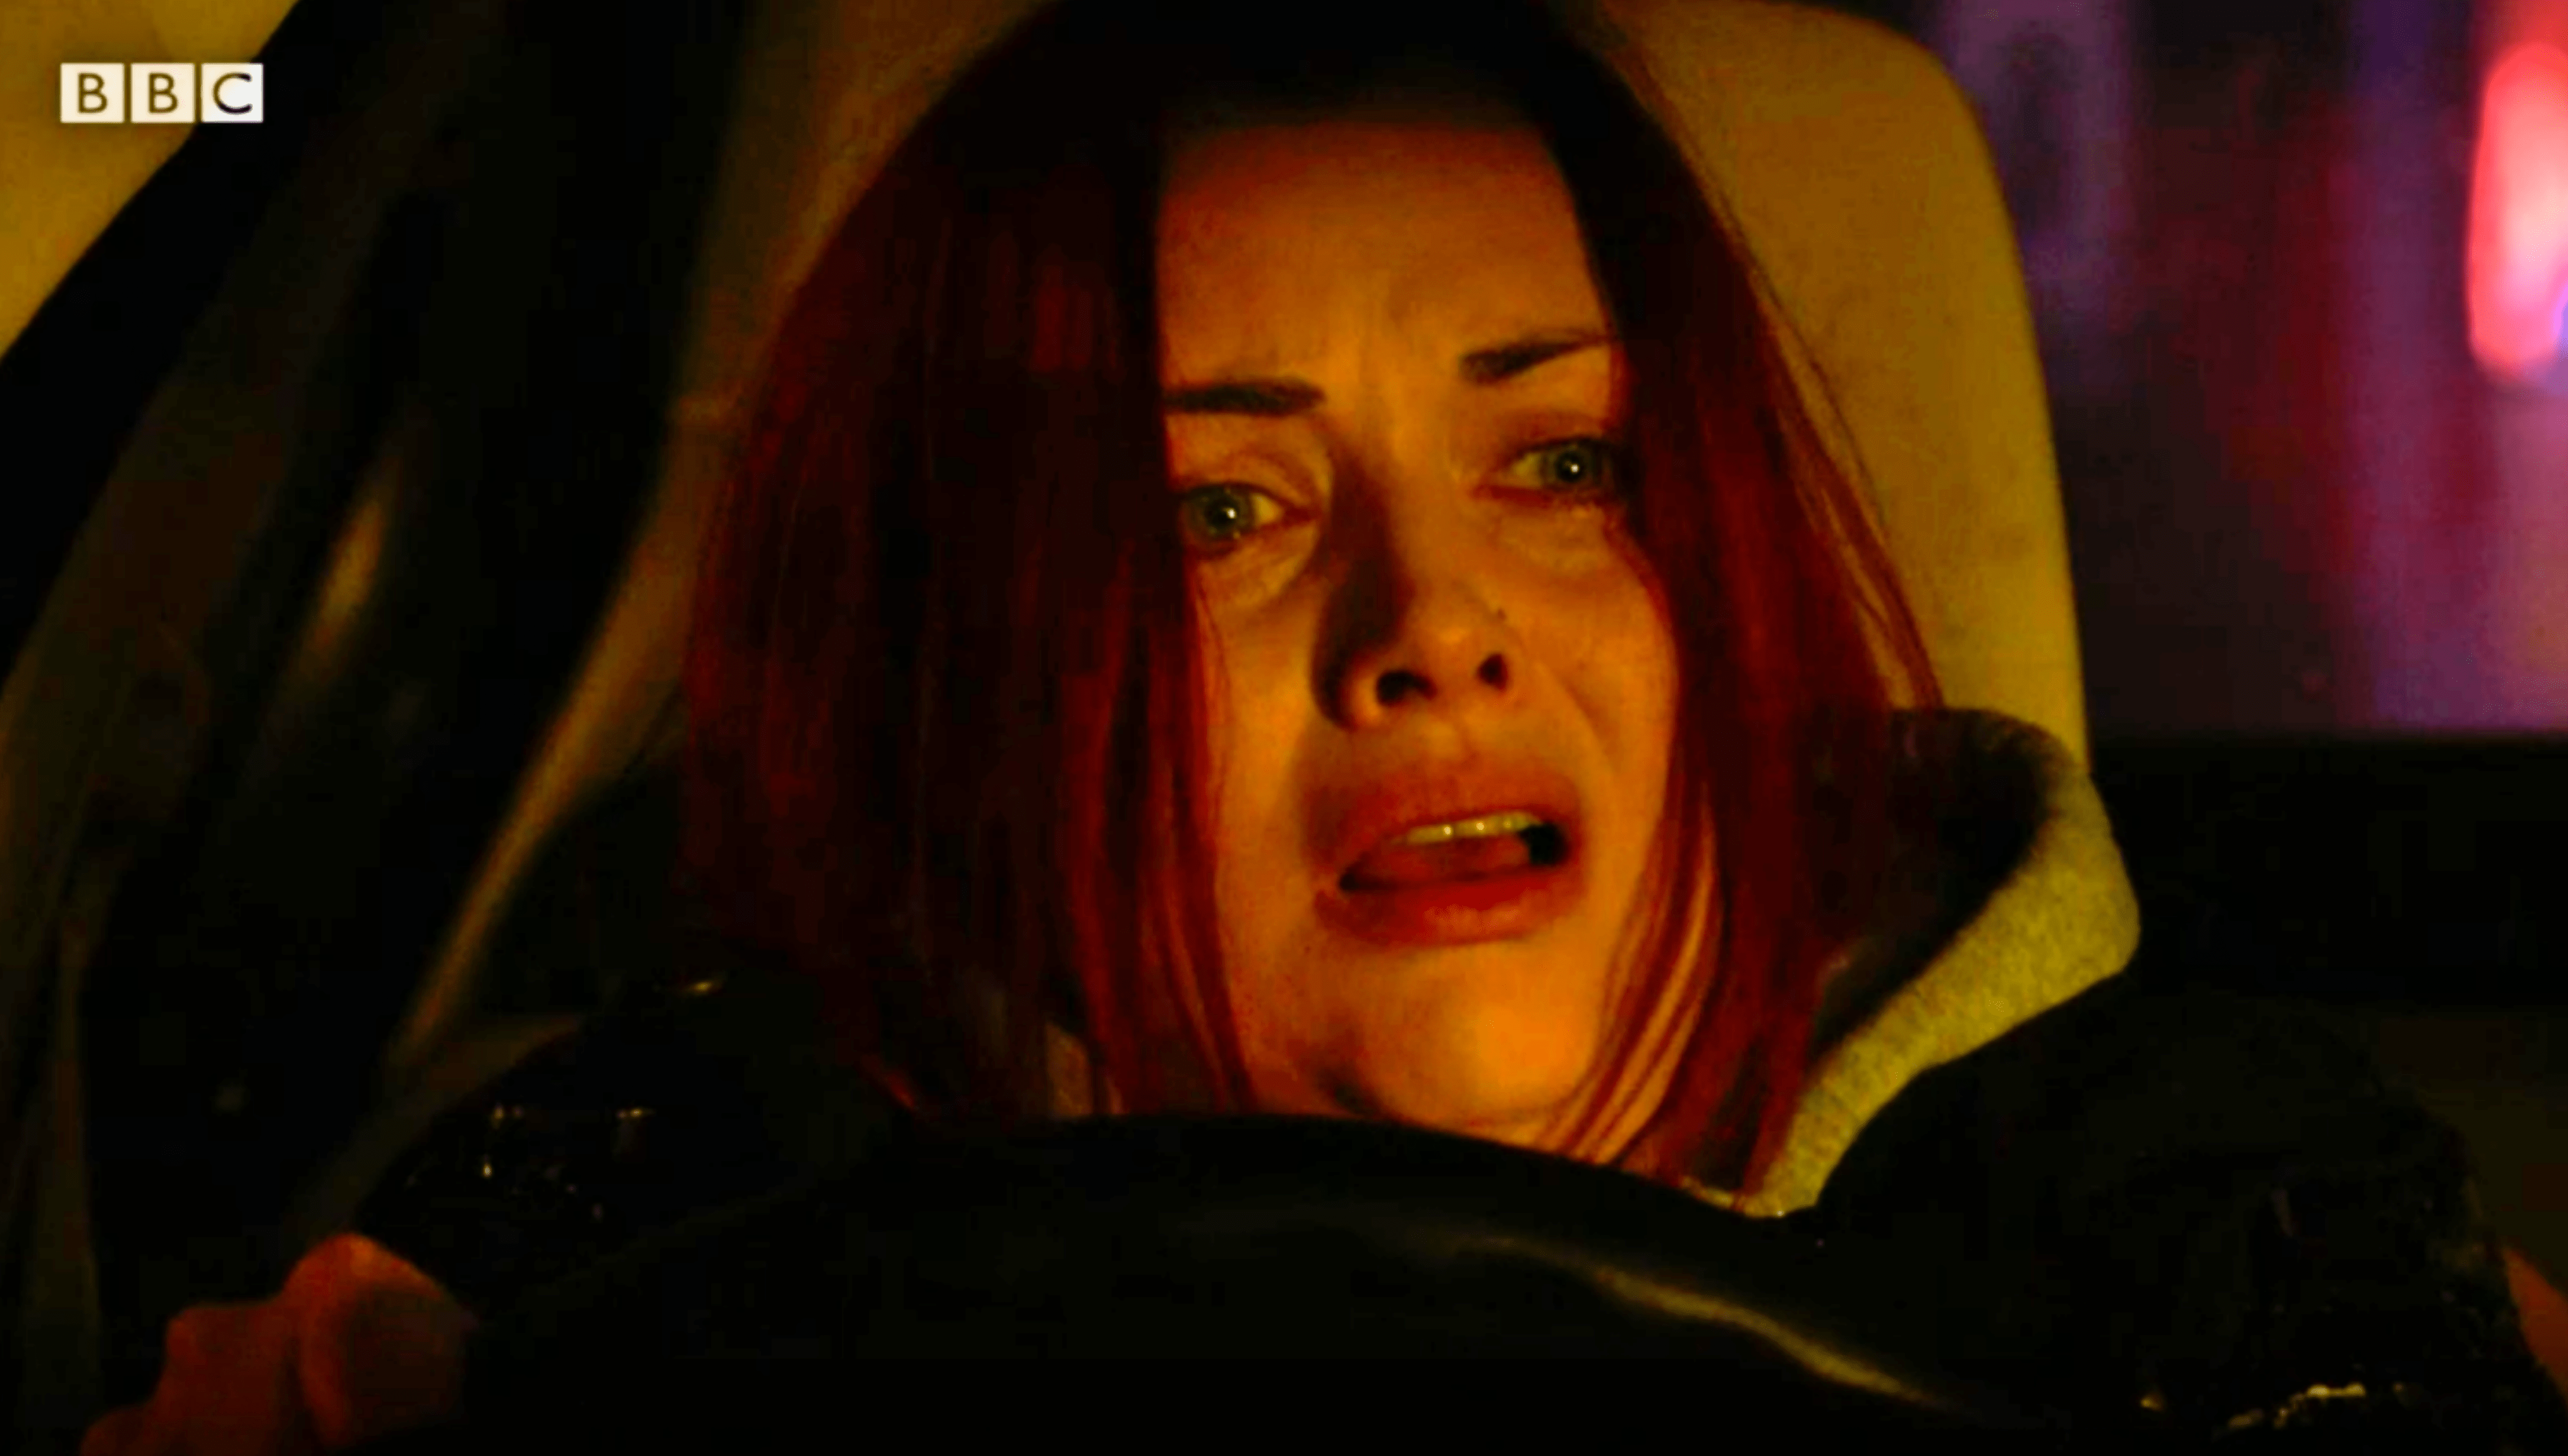 BBC blunder accidentally revealed who Whitney hit in her car in EastEnders